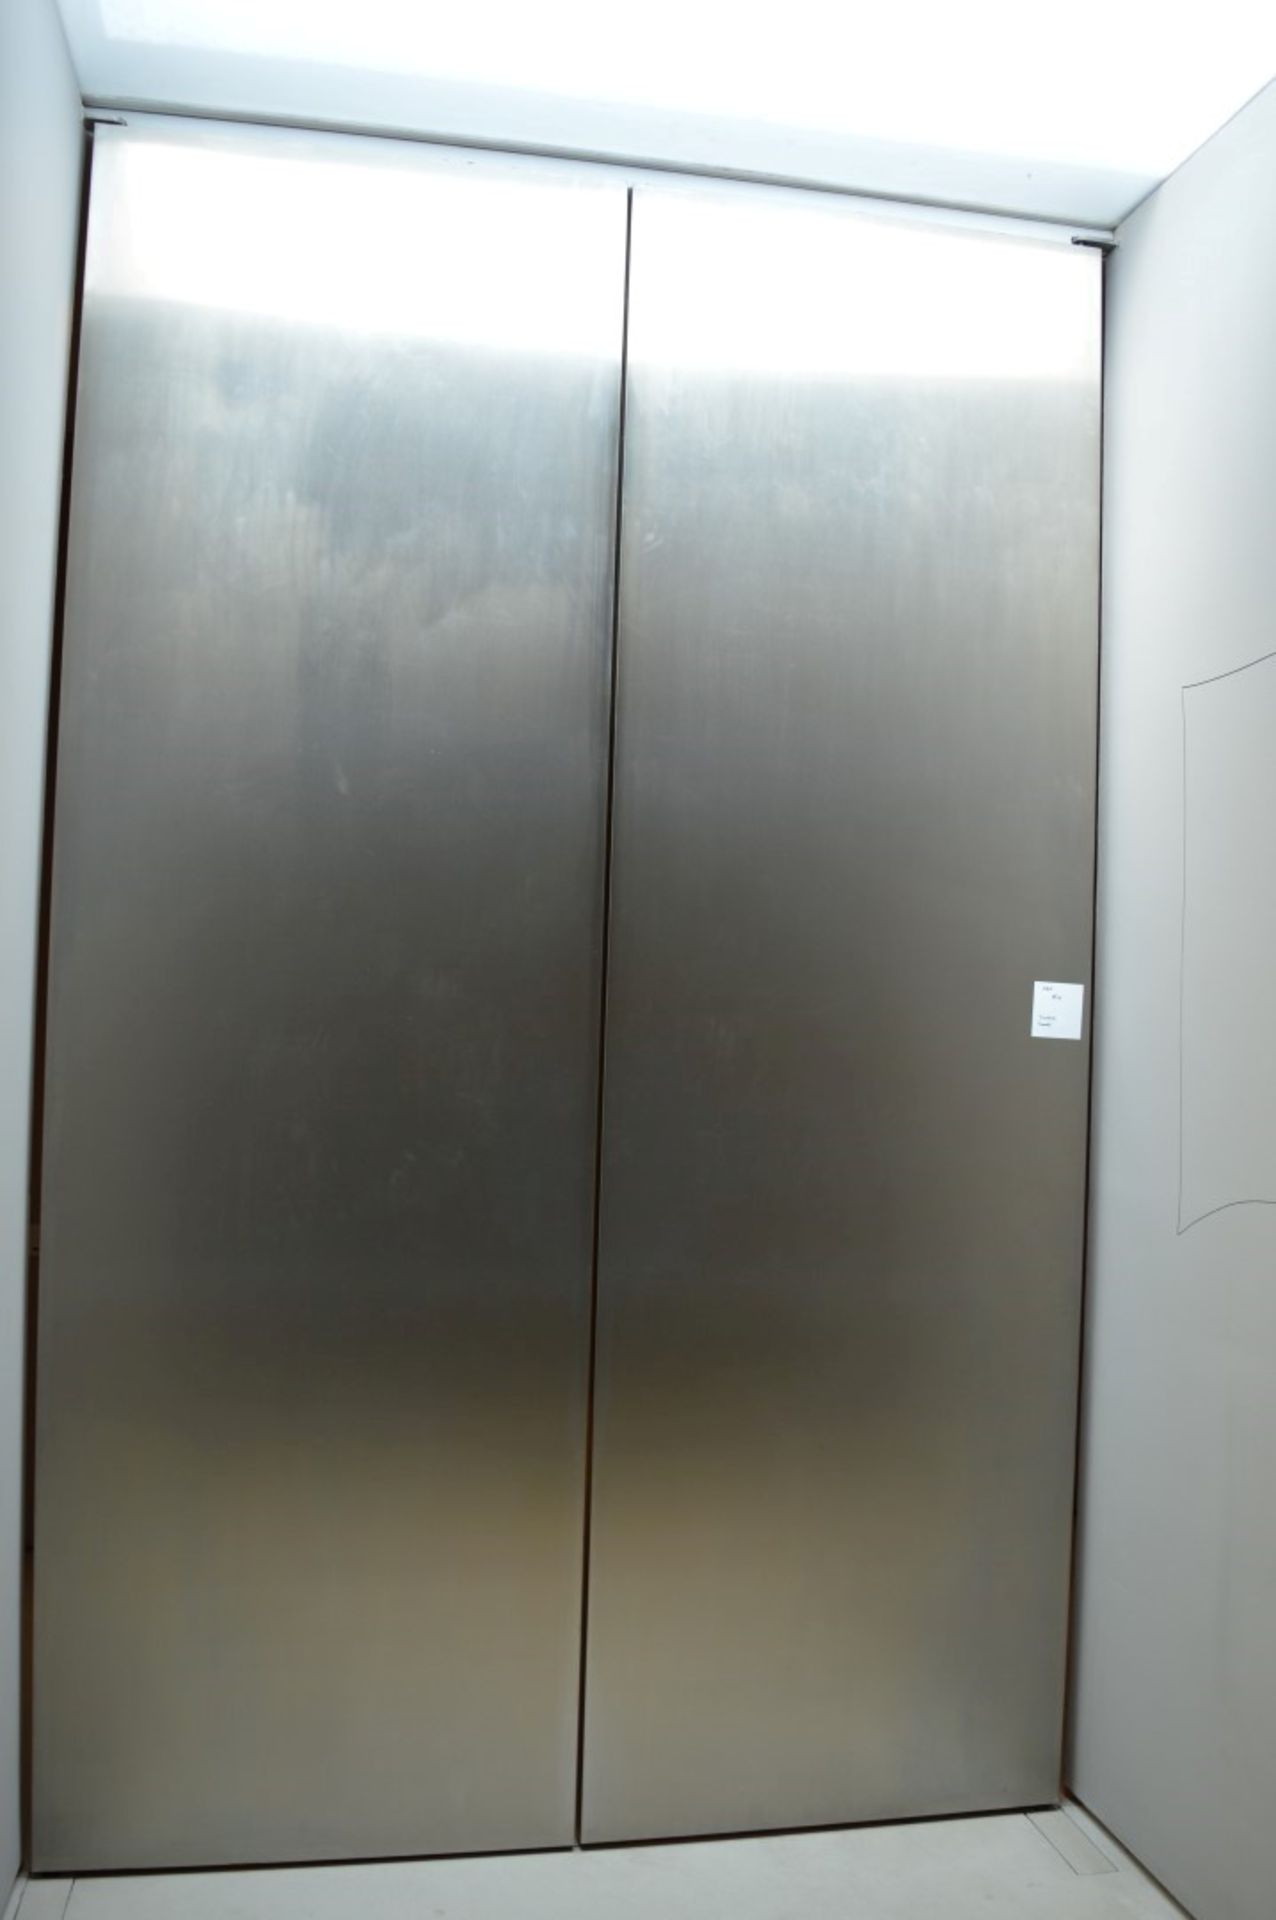 2 x Bespoke Internal Doors With Stainless Steel Finish - Pair of - Large Size - Ideal For Interior - Image 7 of 10